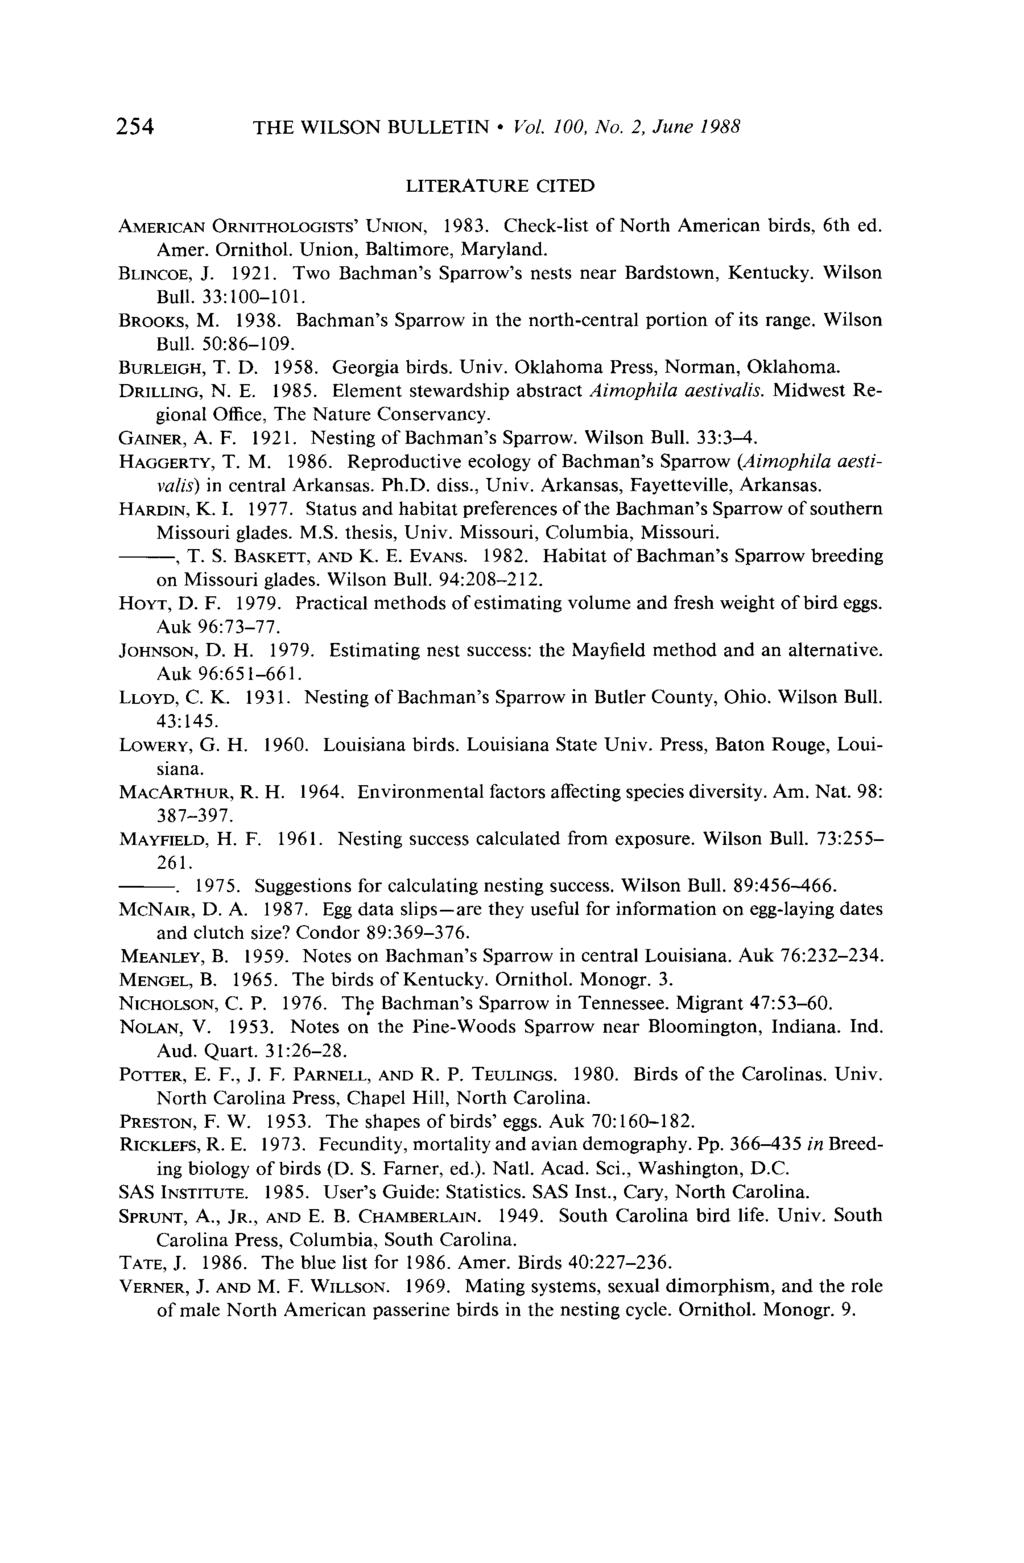 254 THE WILSON BULLETIN l Vol. 100, No. 2, June 1988 LITERATURE CITED AMERICAN ORNITHOLOGISTS UNION, 1983. Check-list of North American birds, 6th ed. Amer. Omithol. Union, Baltimore, Maryland.